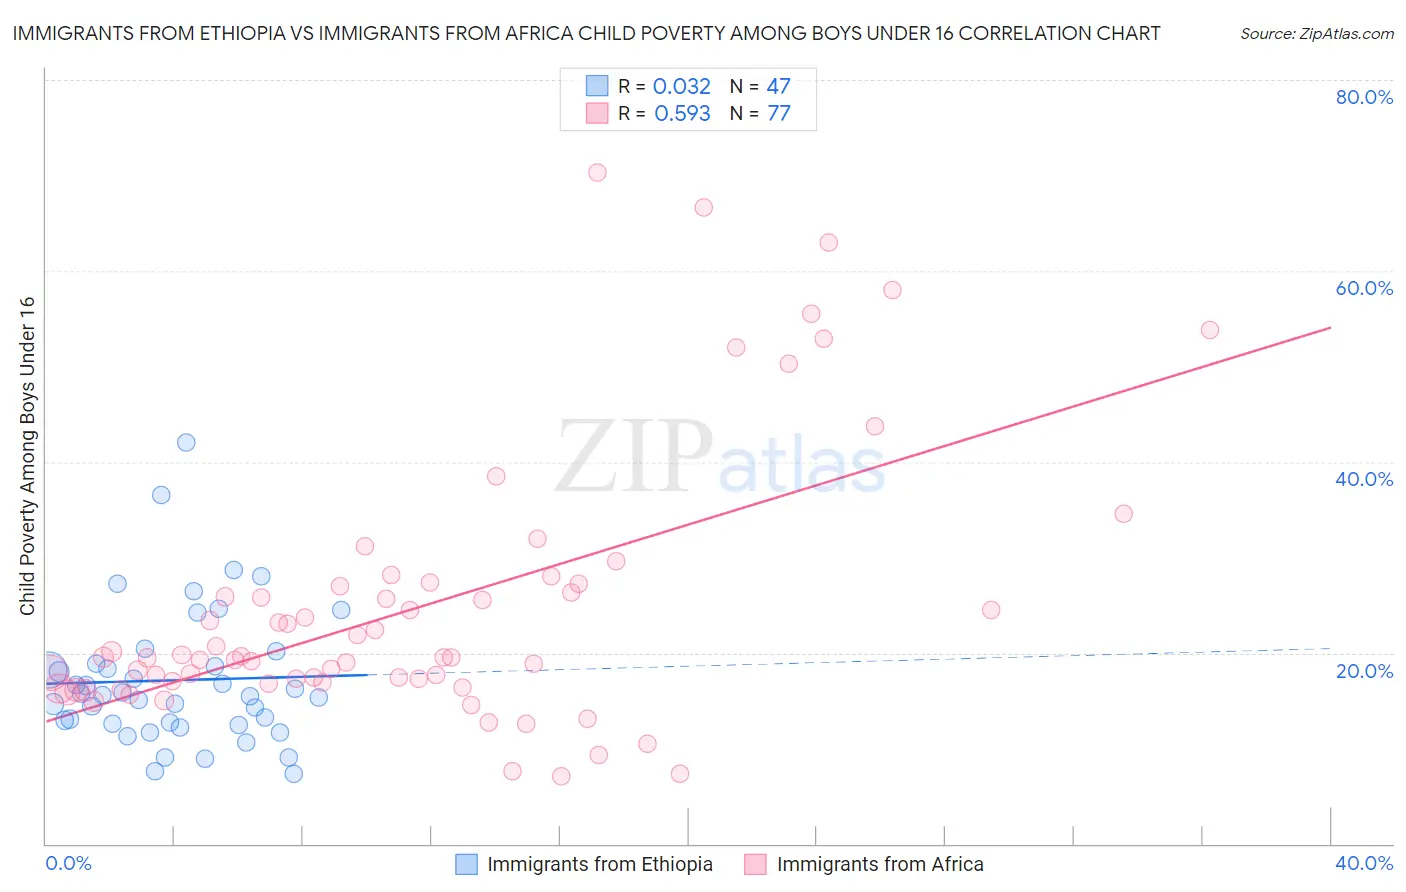 Immigrants from Ethiopia vs Immigrants from Africa Child Poverty Among Boys Under 16